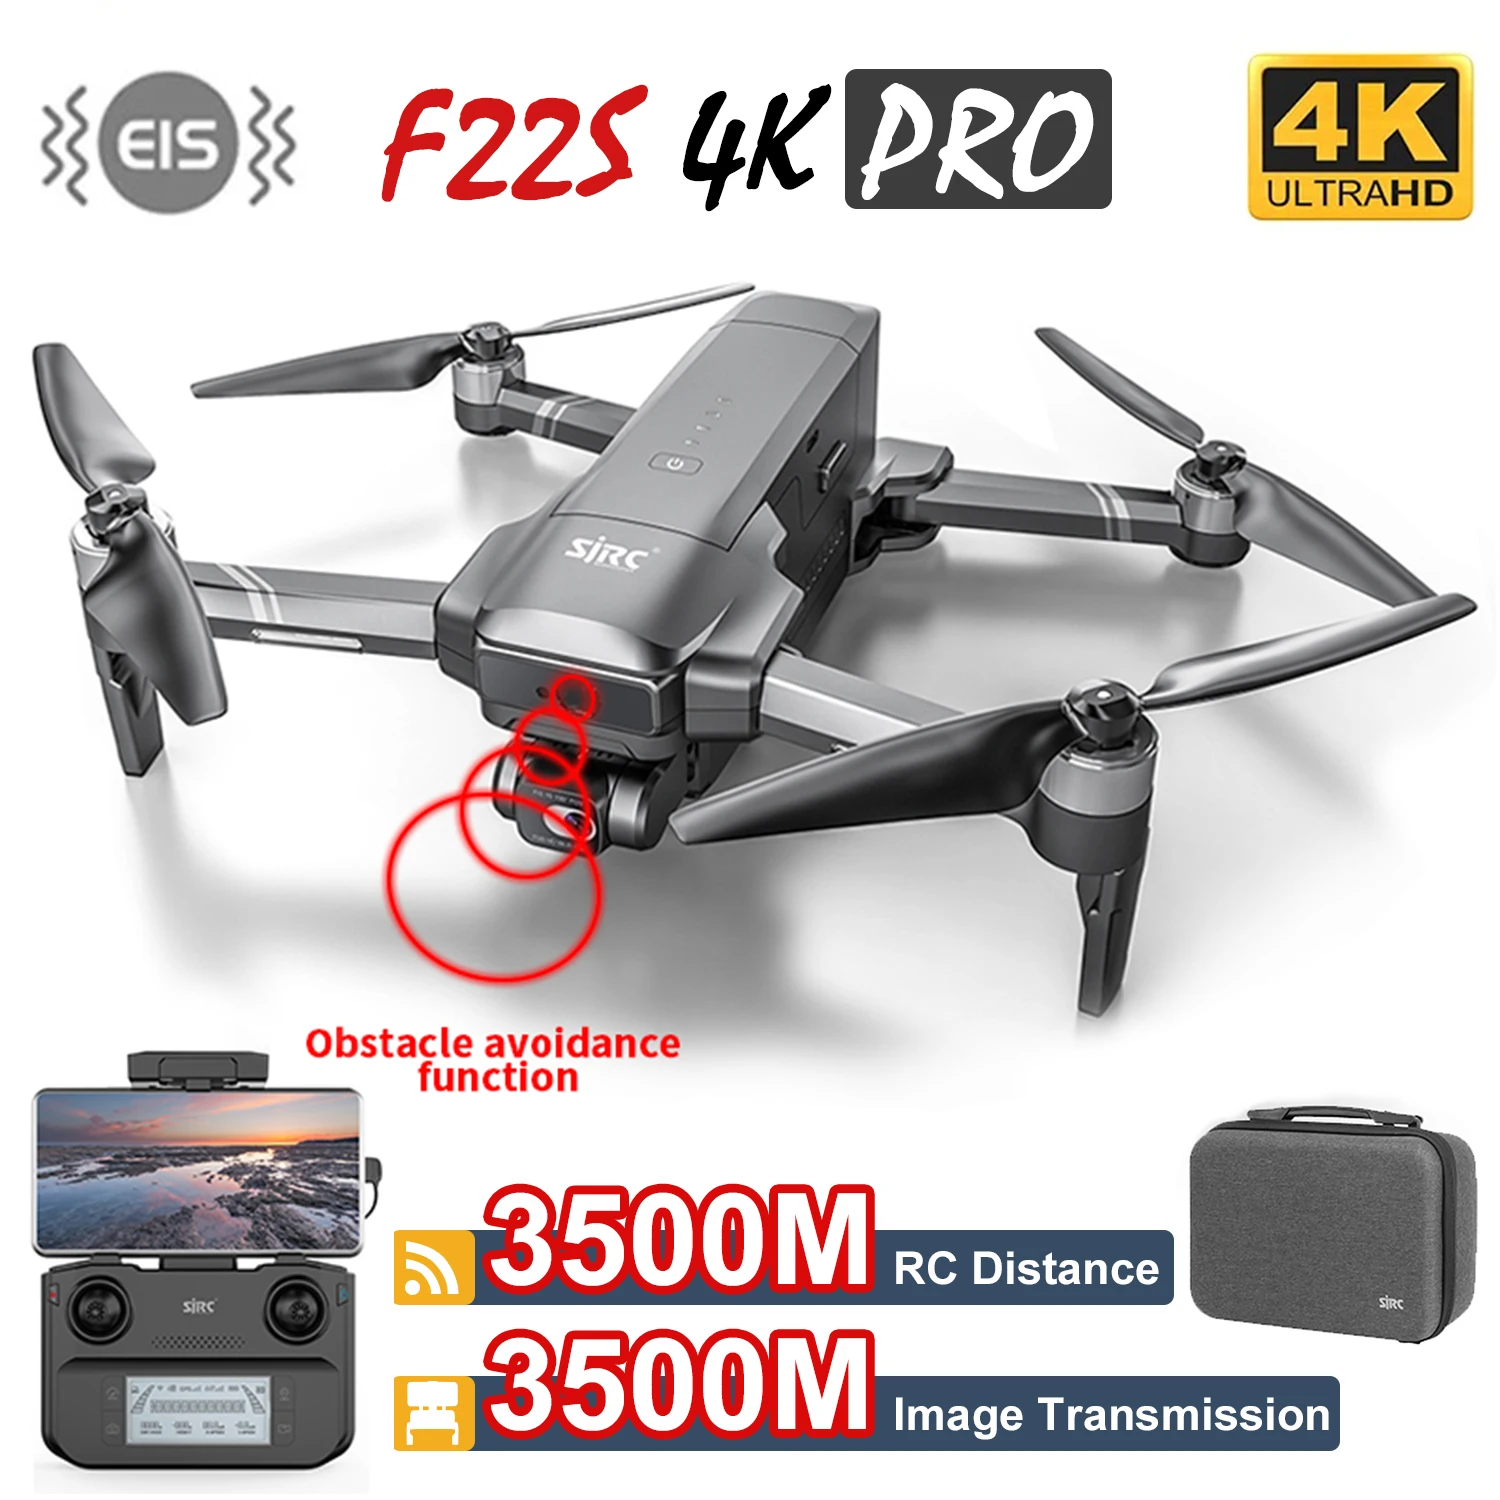 SJRC F22 / F22S 4K Pro Drone With Camera Obstacle Avoidance 3.5KM 2-axis... - $350.85+